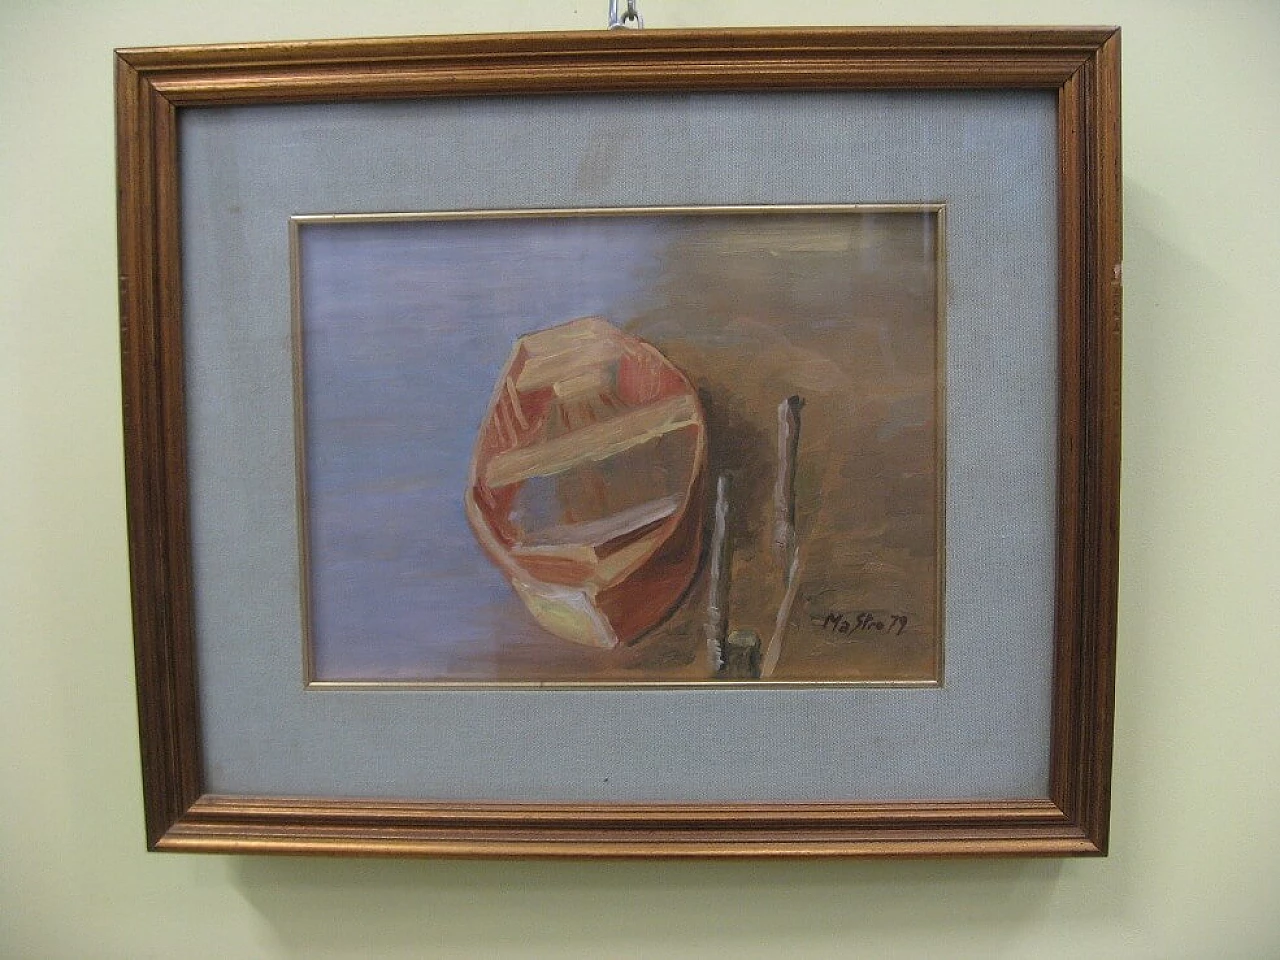 Mario Strocchi, Boat on the Rhine, oil painting on plywood, 1979 1